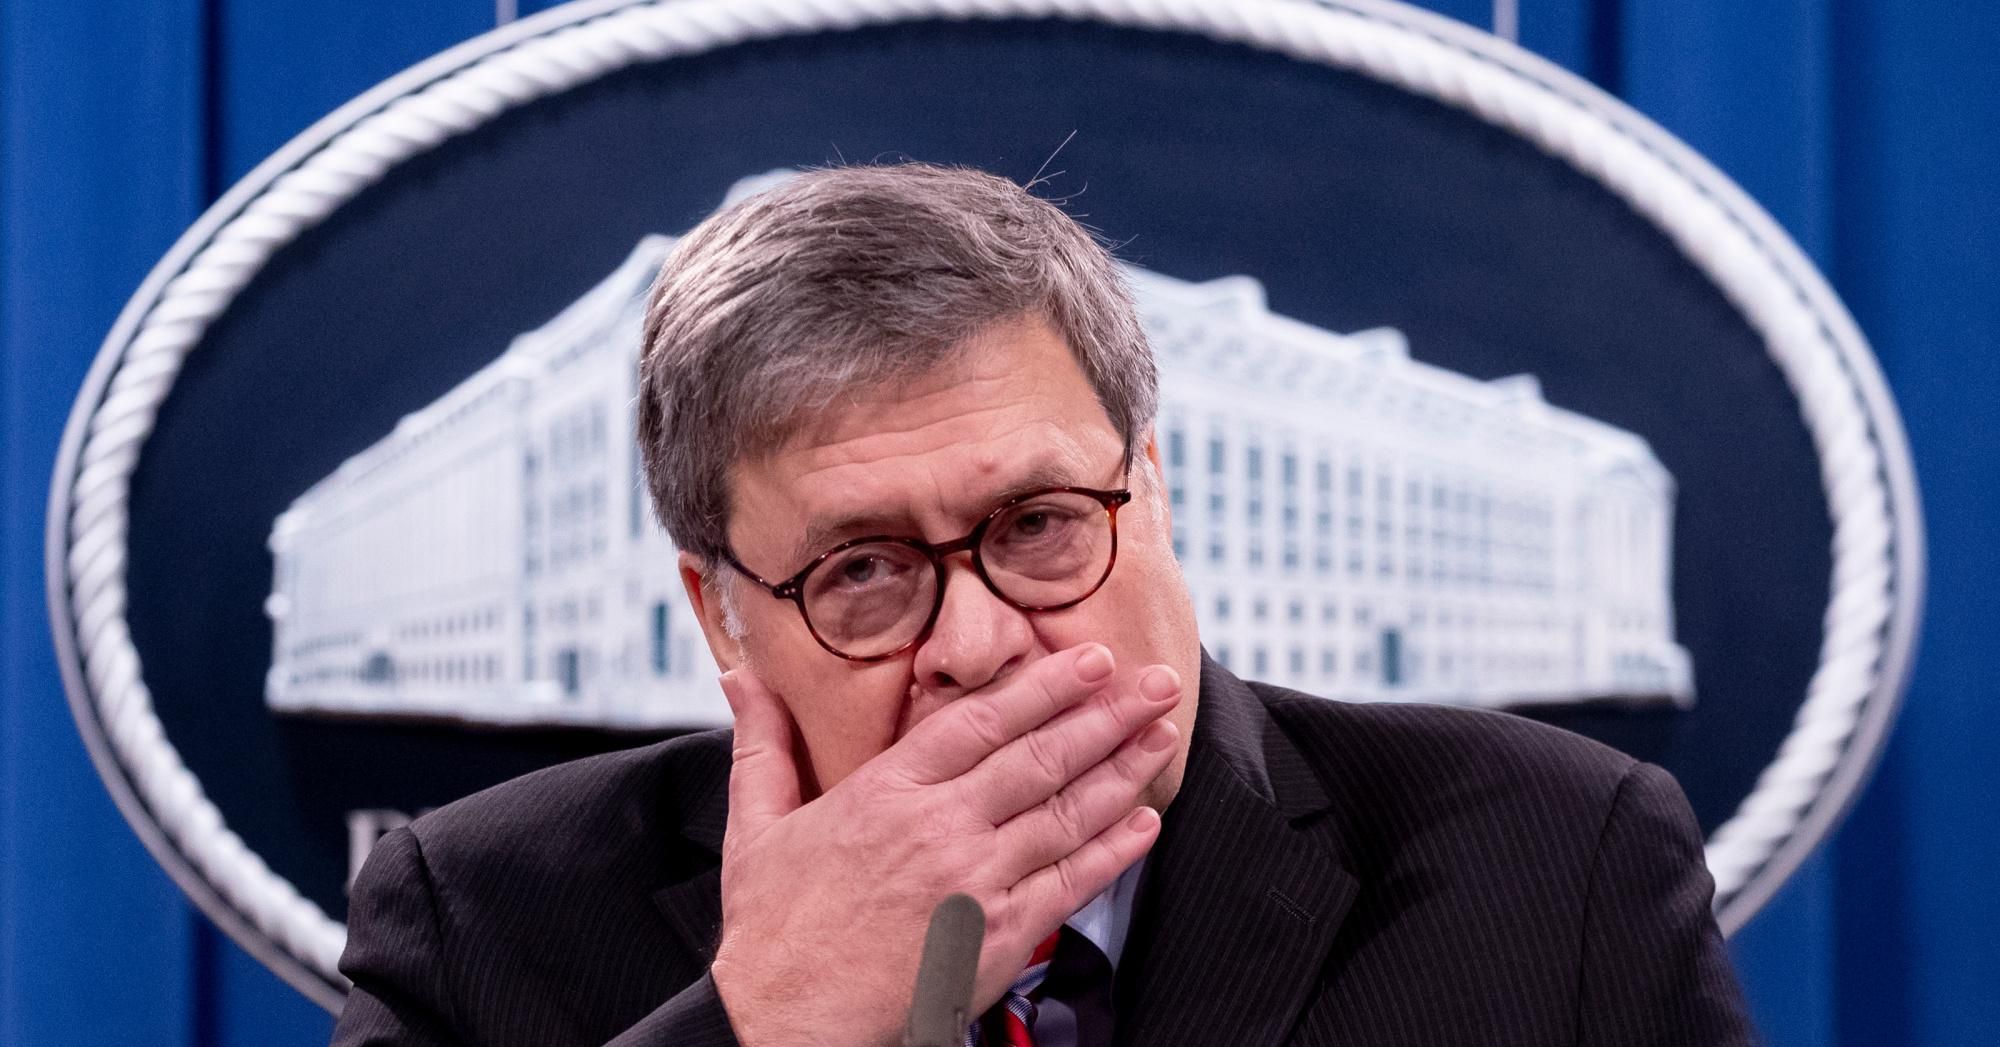 Then-U.S. Attorney General Bill Barr holds a news conference at the Department of Justice on December 21, 2020 in Washington, D.C. (Photo: Michael Reynolds-Pool via Getty Images)